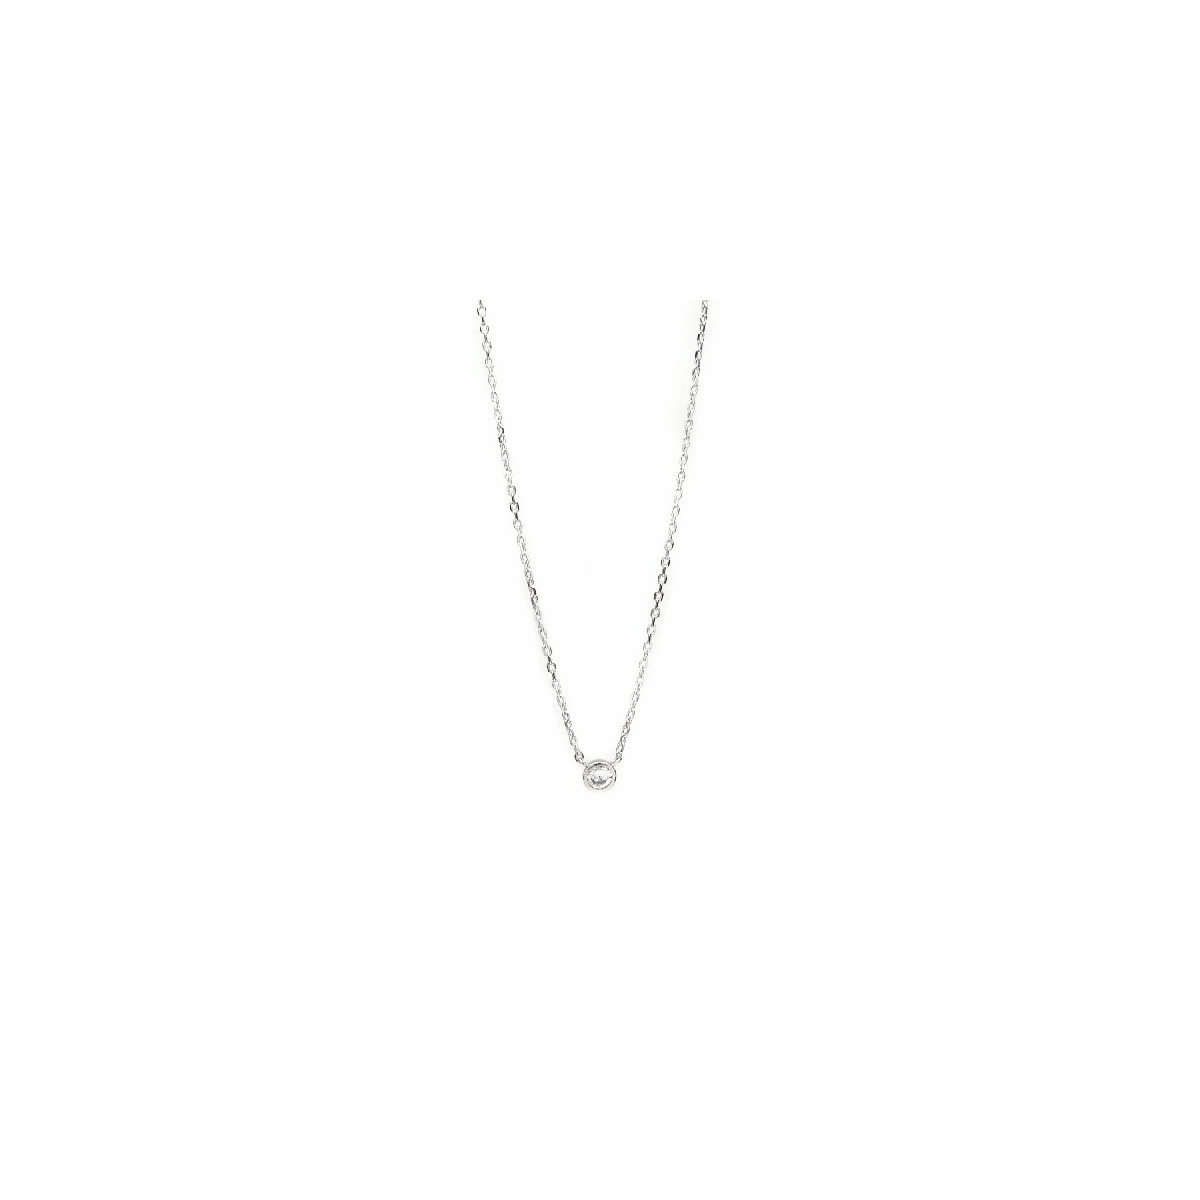 LINEARGENT NECKLACE - 15311-W-PE